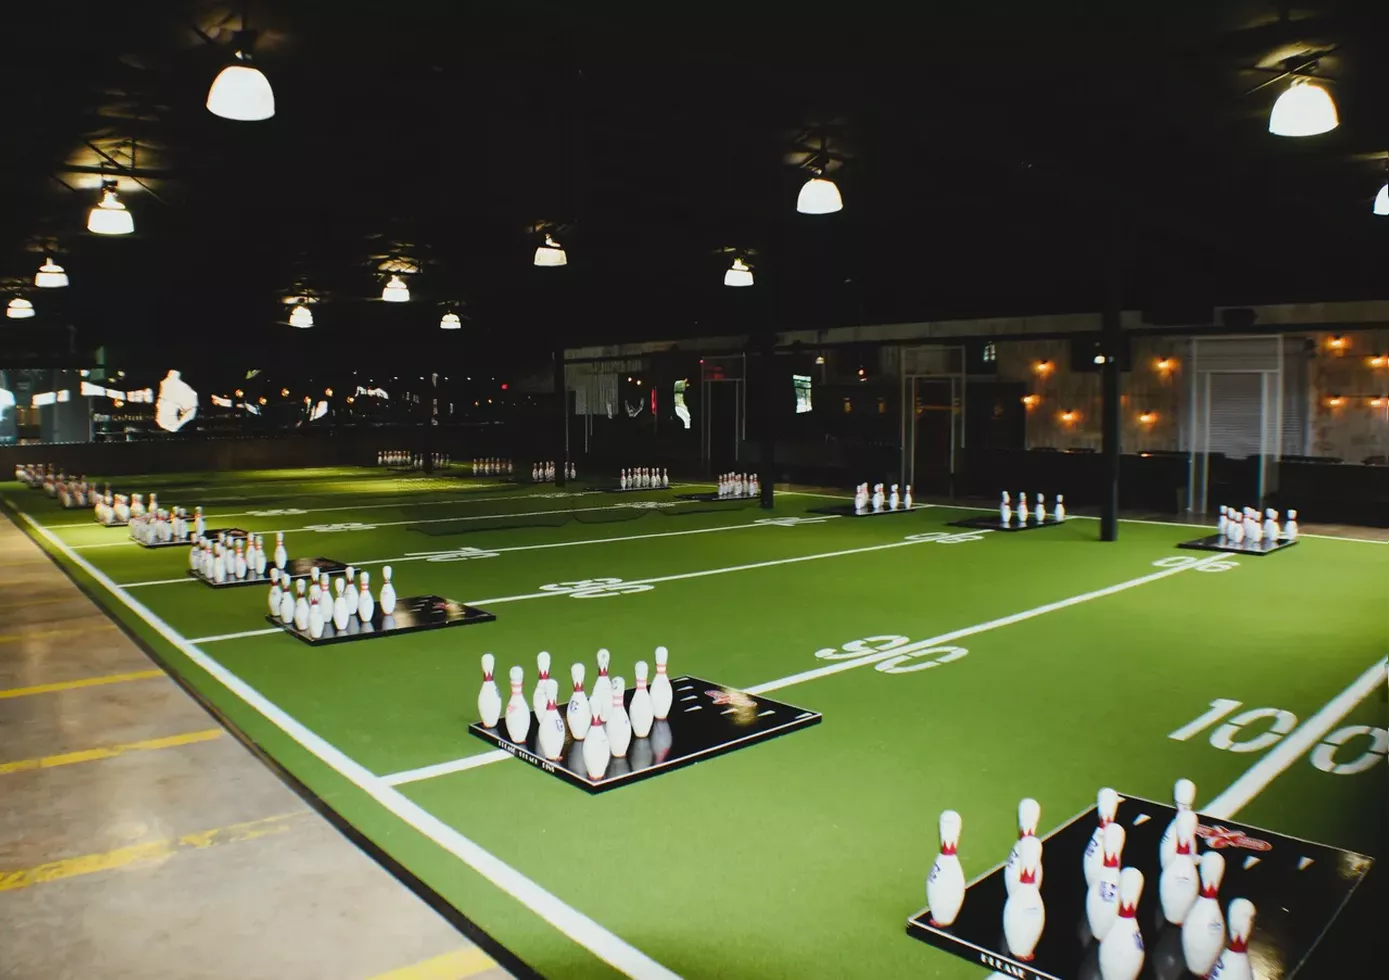 Get ready to toss! This action-packed PinToss field at BowGames brings friends together for competitive fun, food, and drinks.